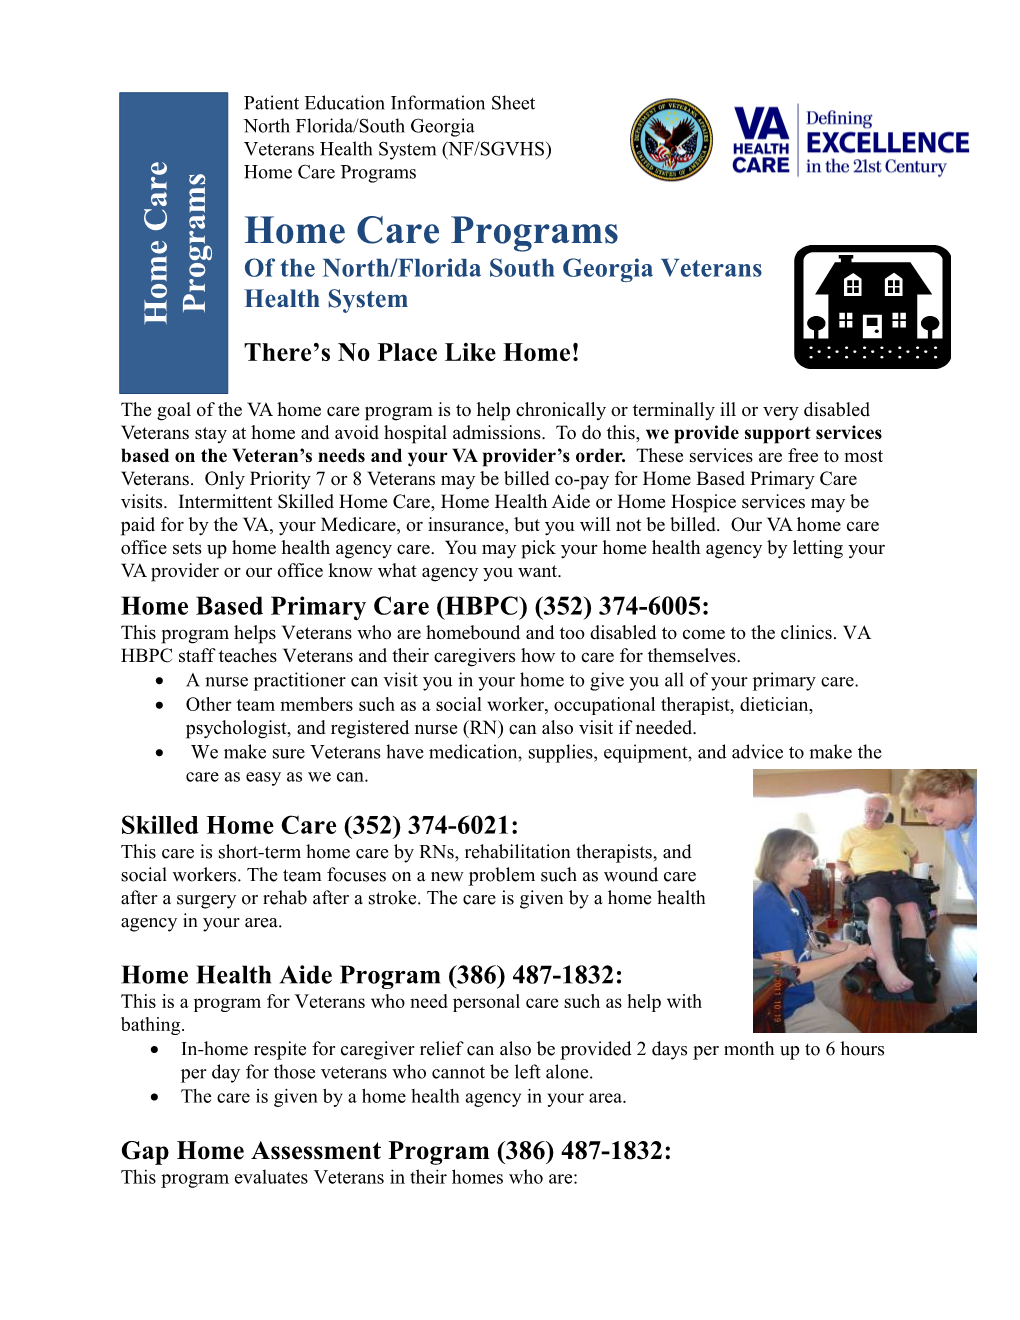 Home Care Programs of NF/SGVHS